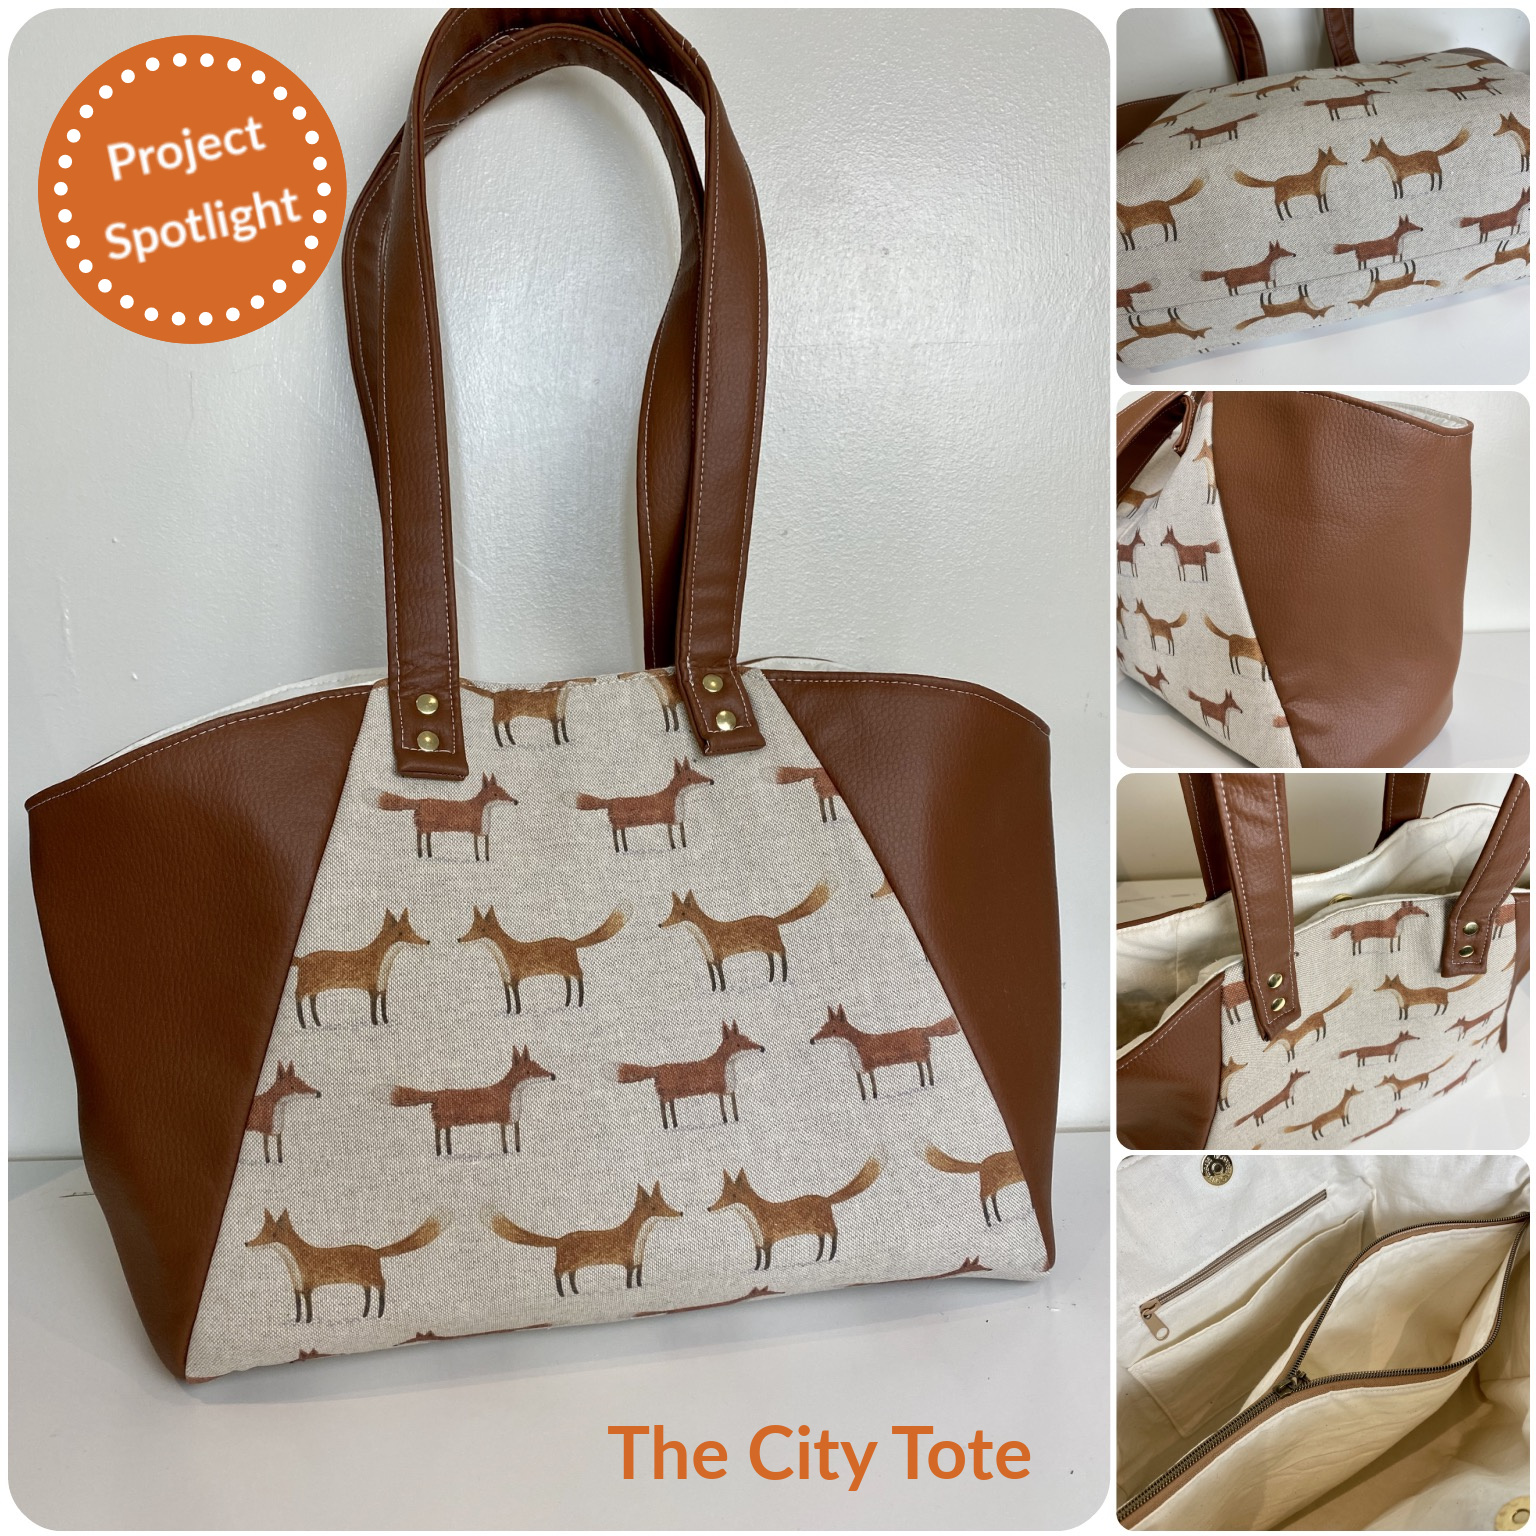 The City Tote from The Complete Bag Making Masterclass, made by Laura Simons